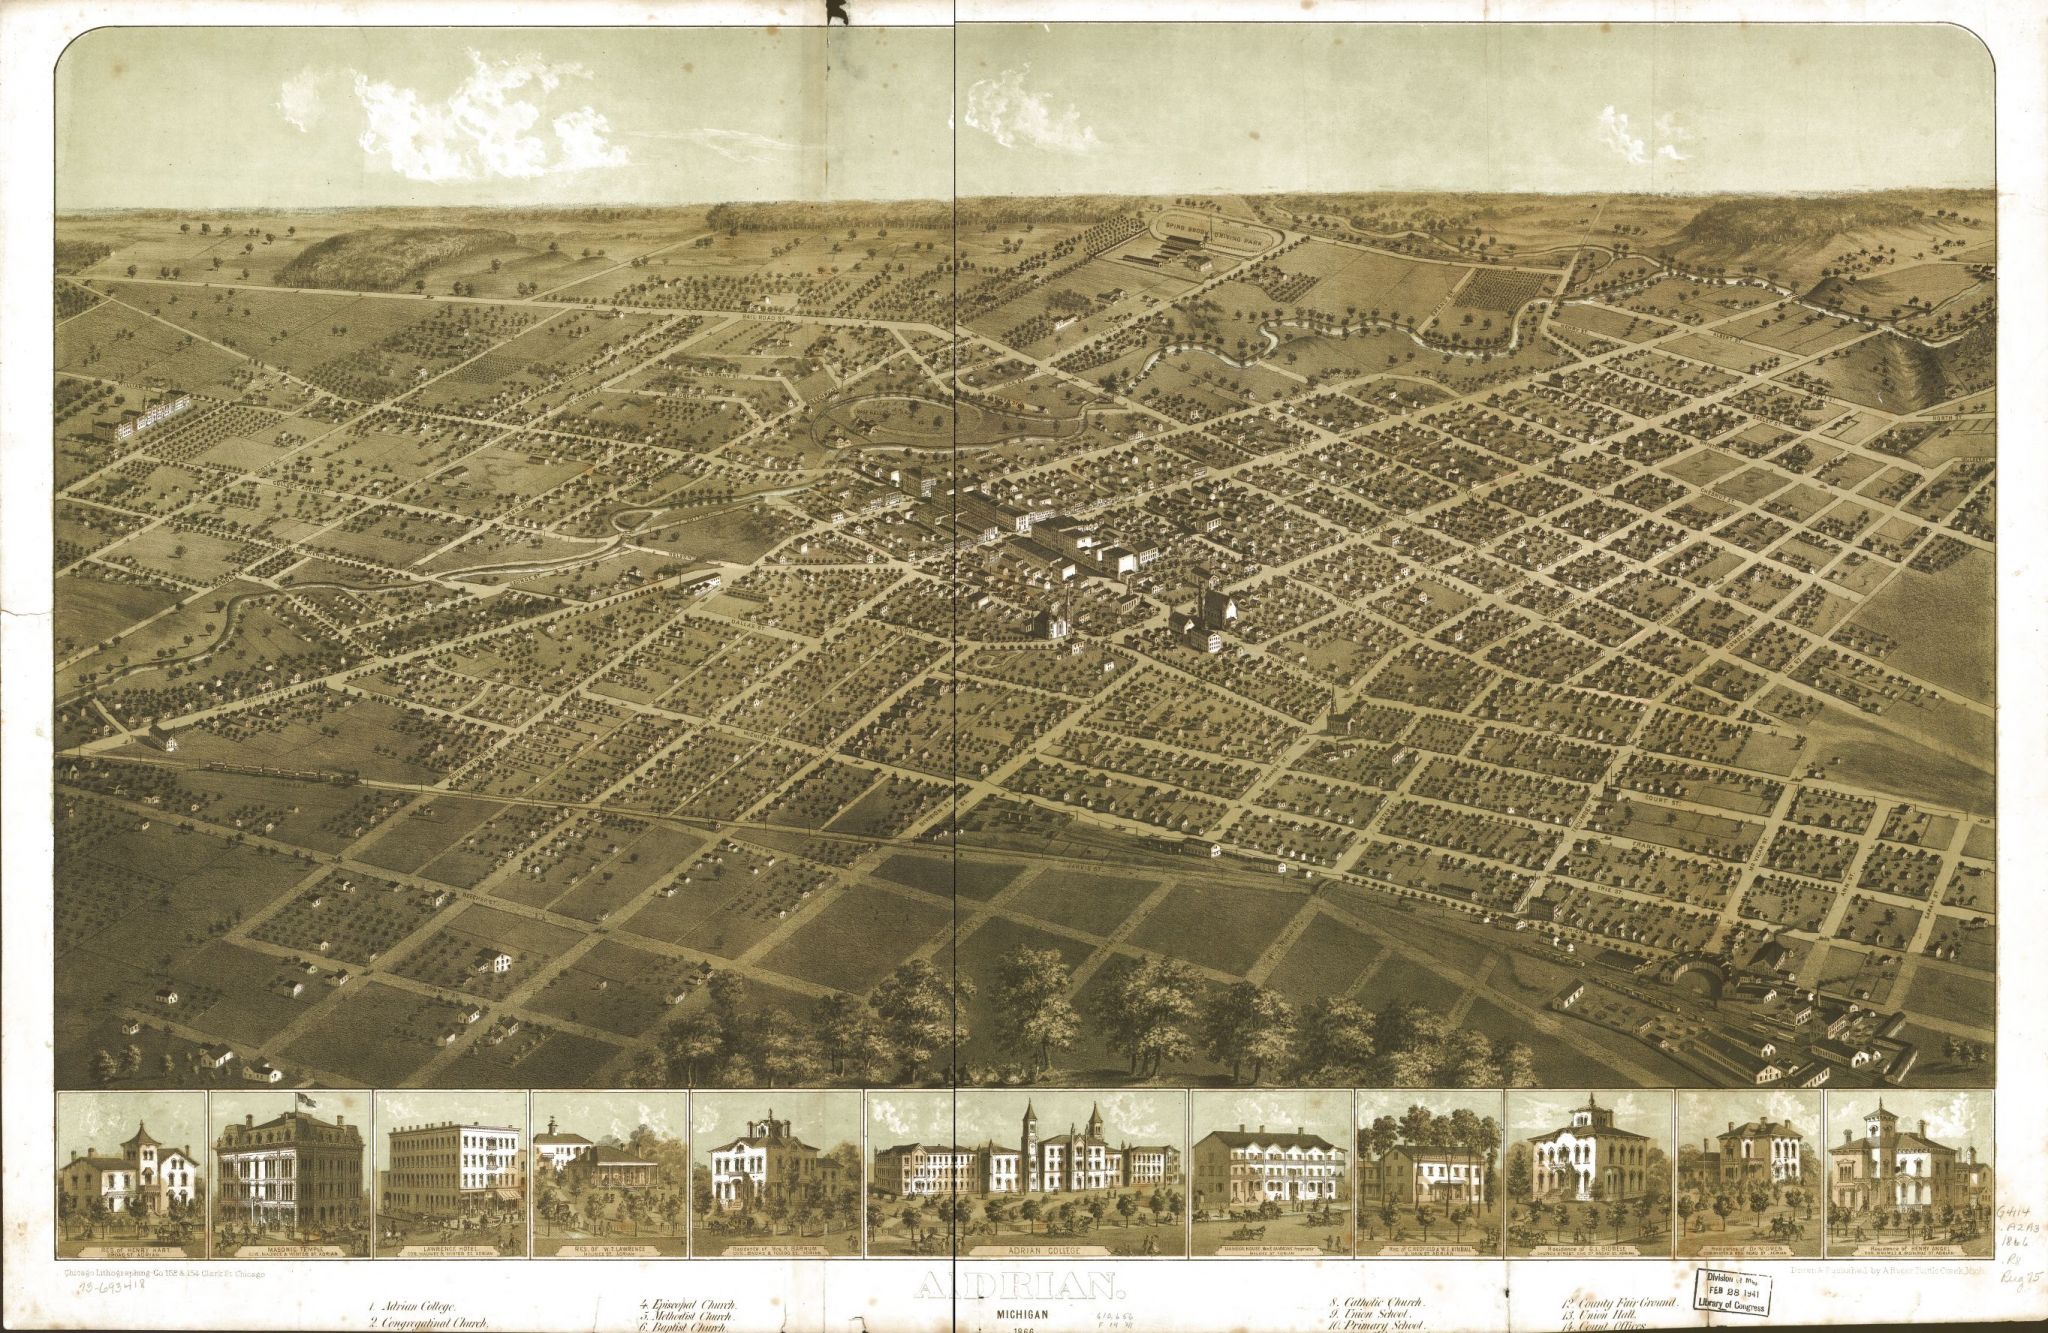 Library of Congress maps show an aerial view of early Michigan - Midland Daily News2048 x 1333